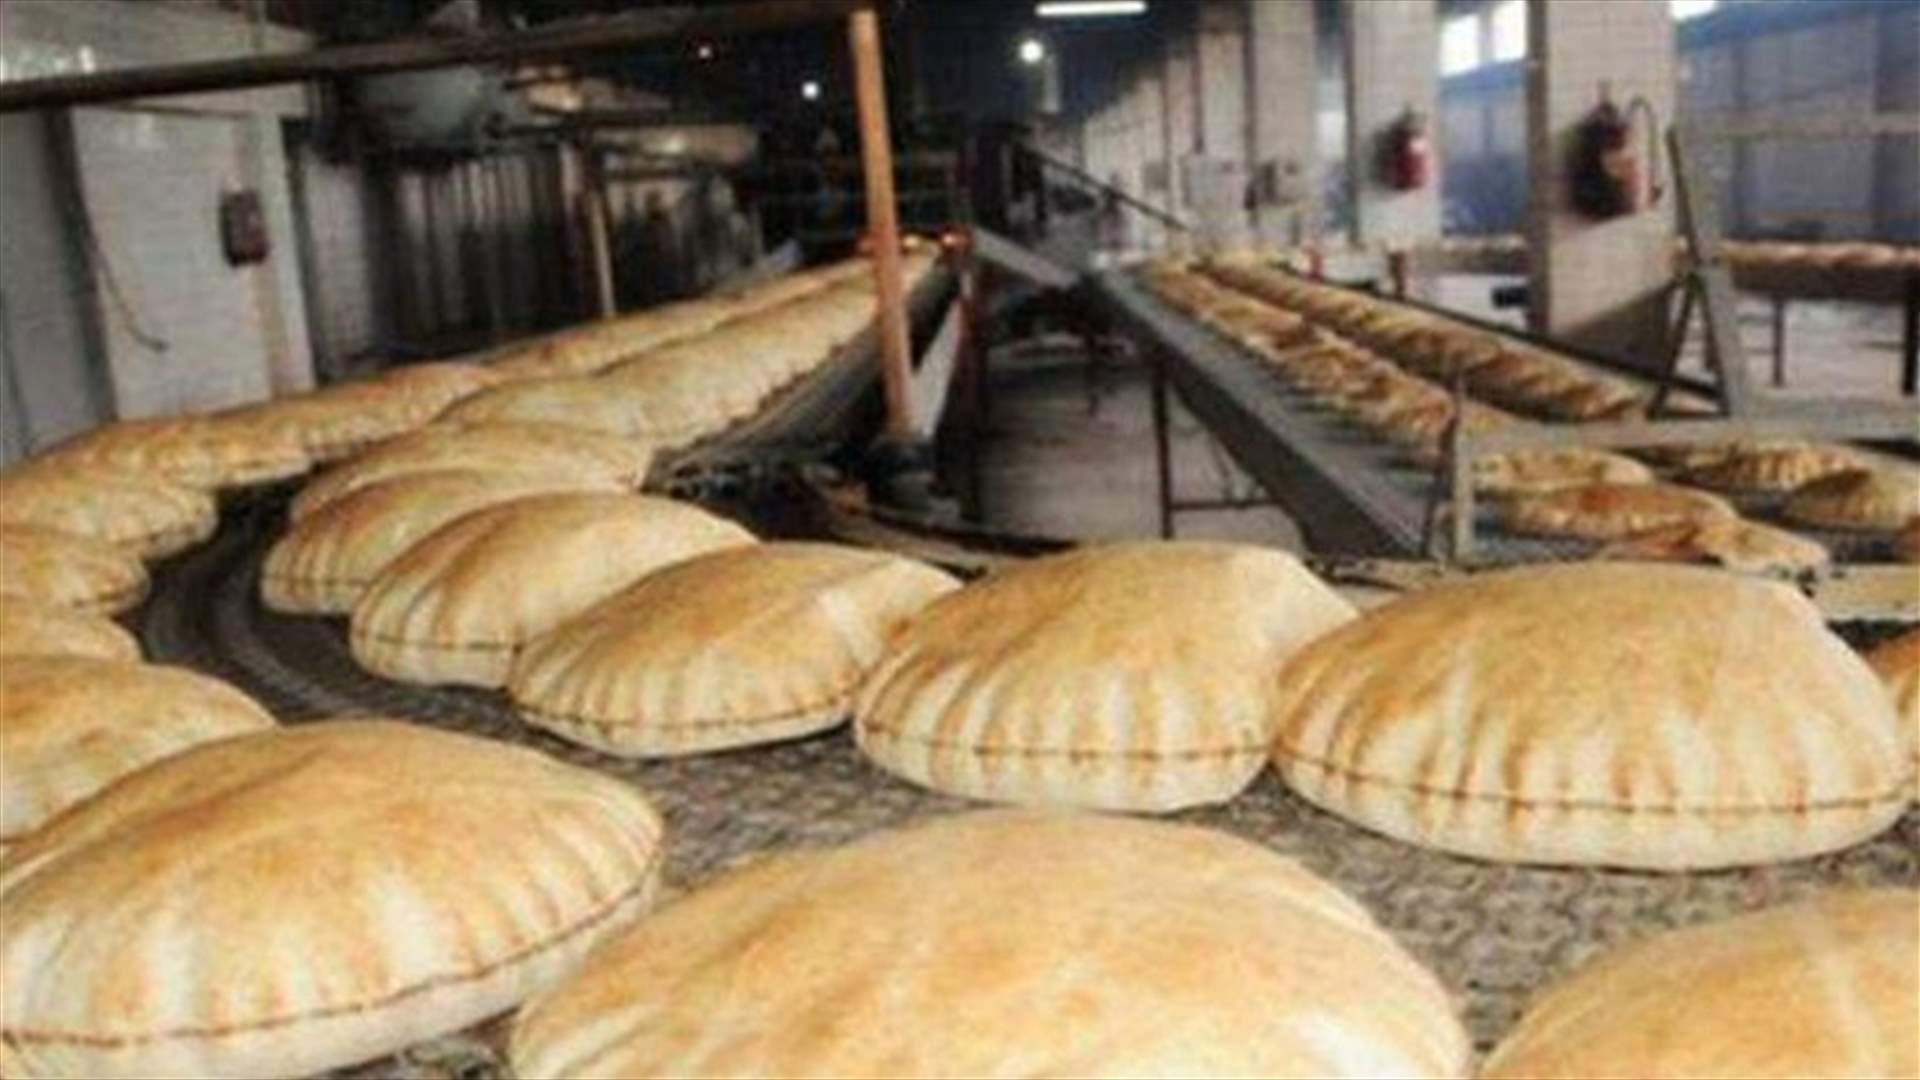 Union of bakery workers urges bakeries to end strike